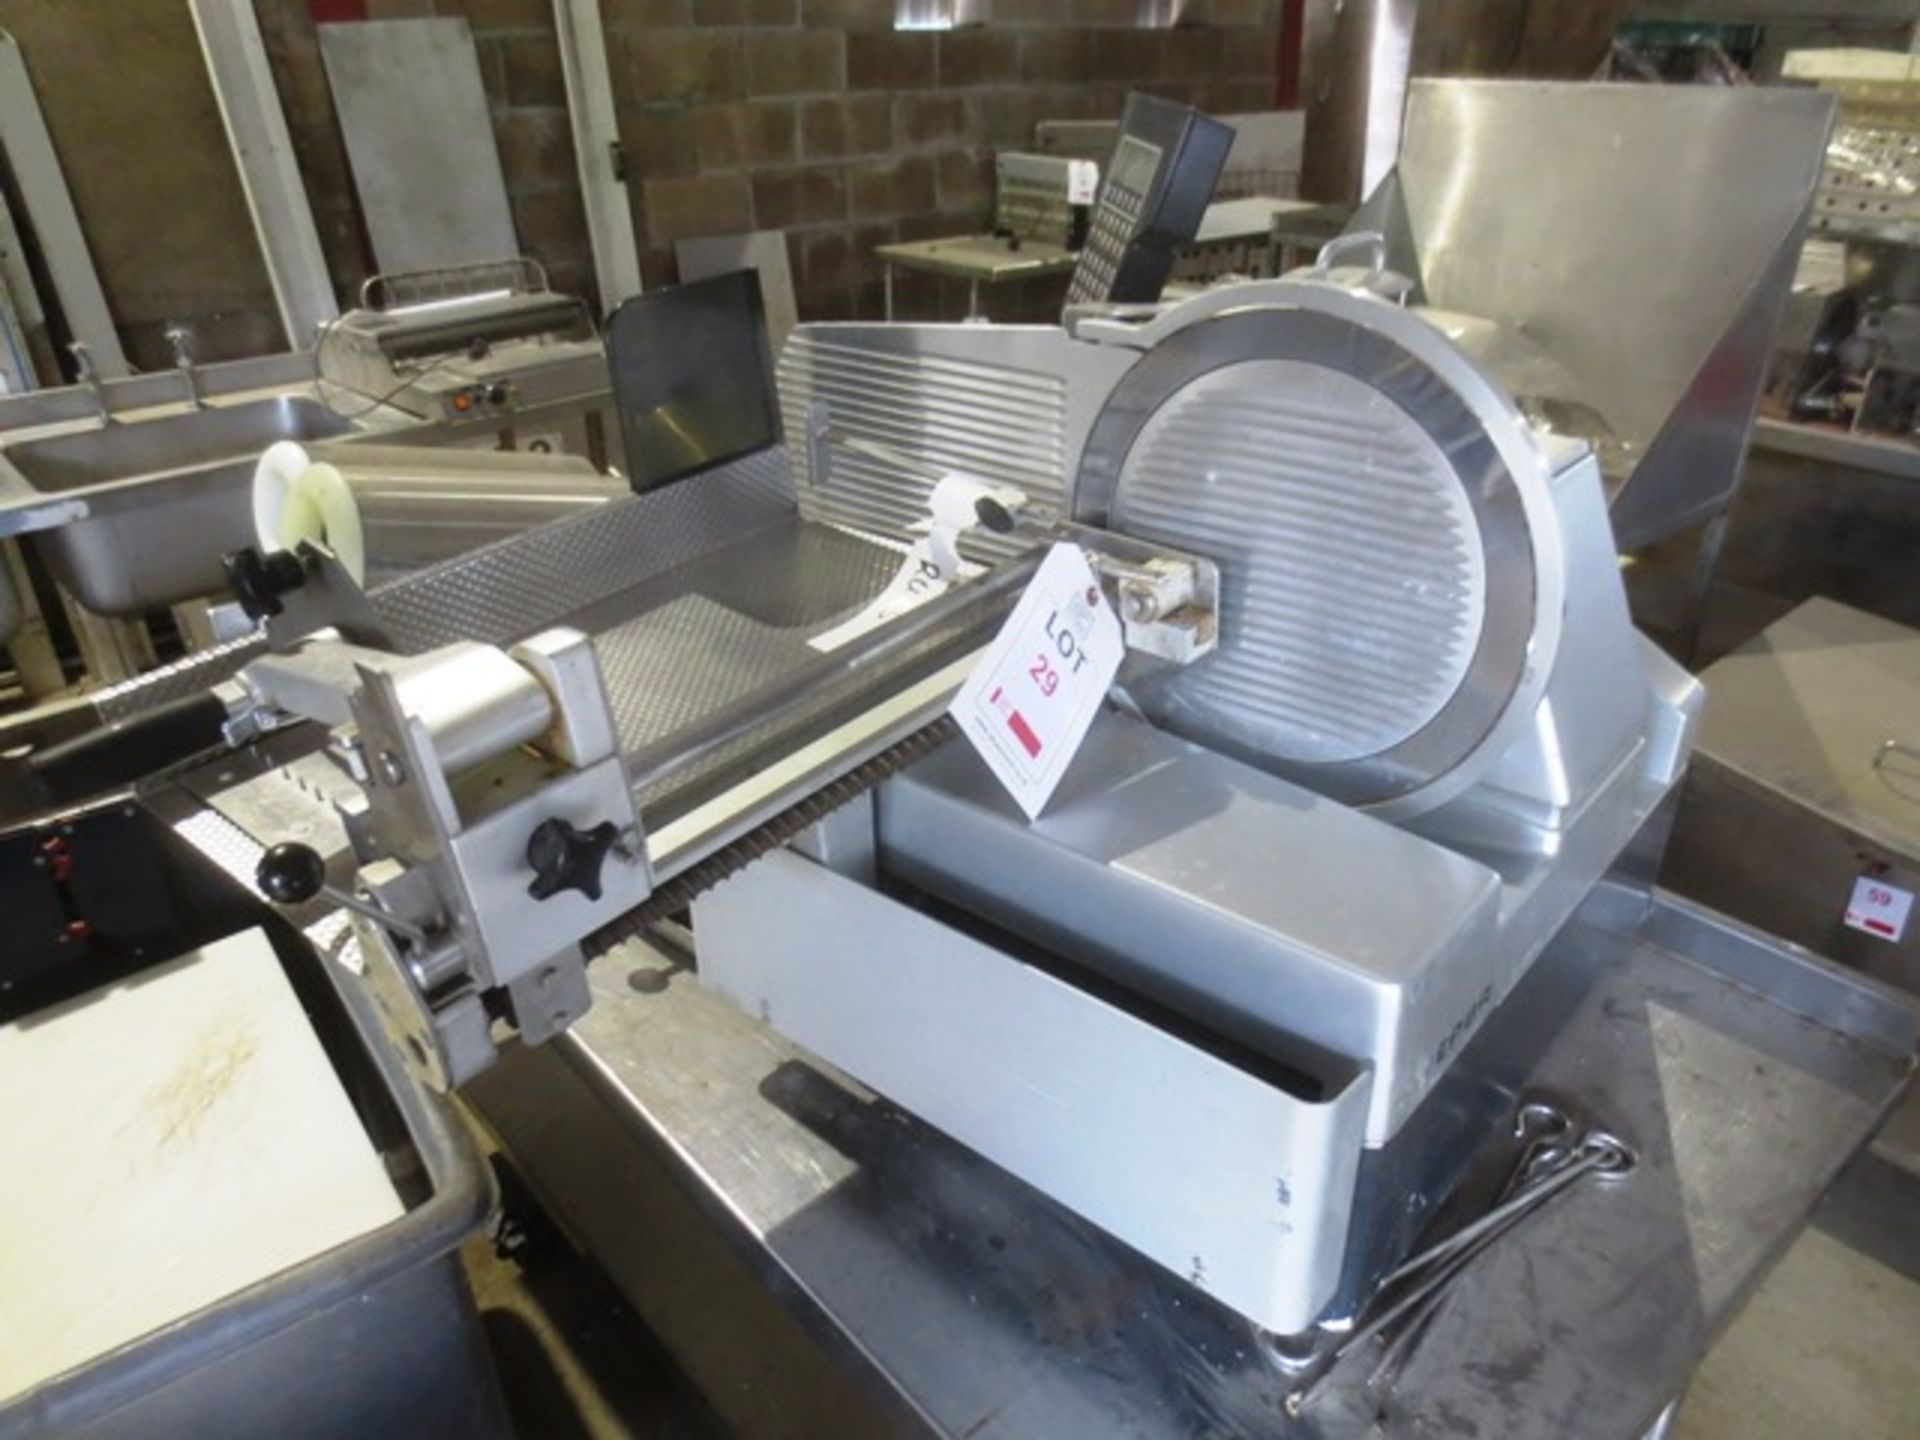 Bizerba stainless steel bench top slicer, model A404, serial no: 10169454, 240v, with digital - Image 3 of 3